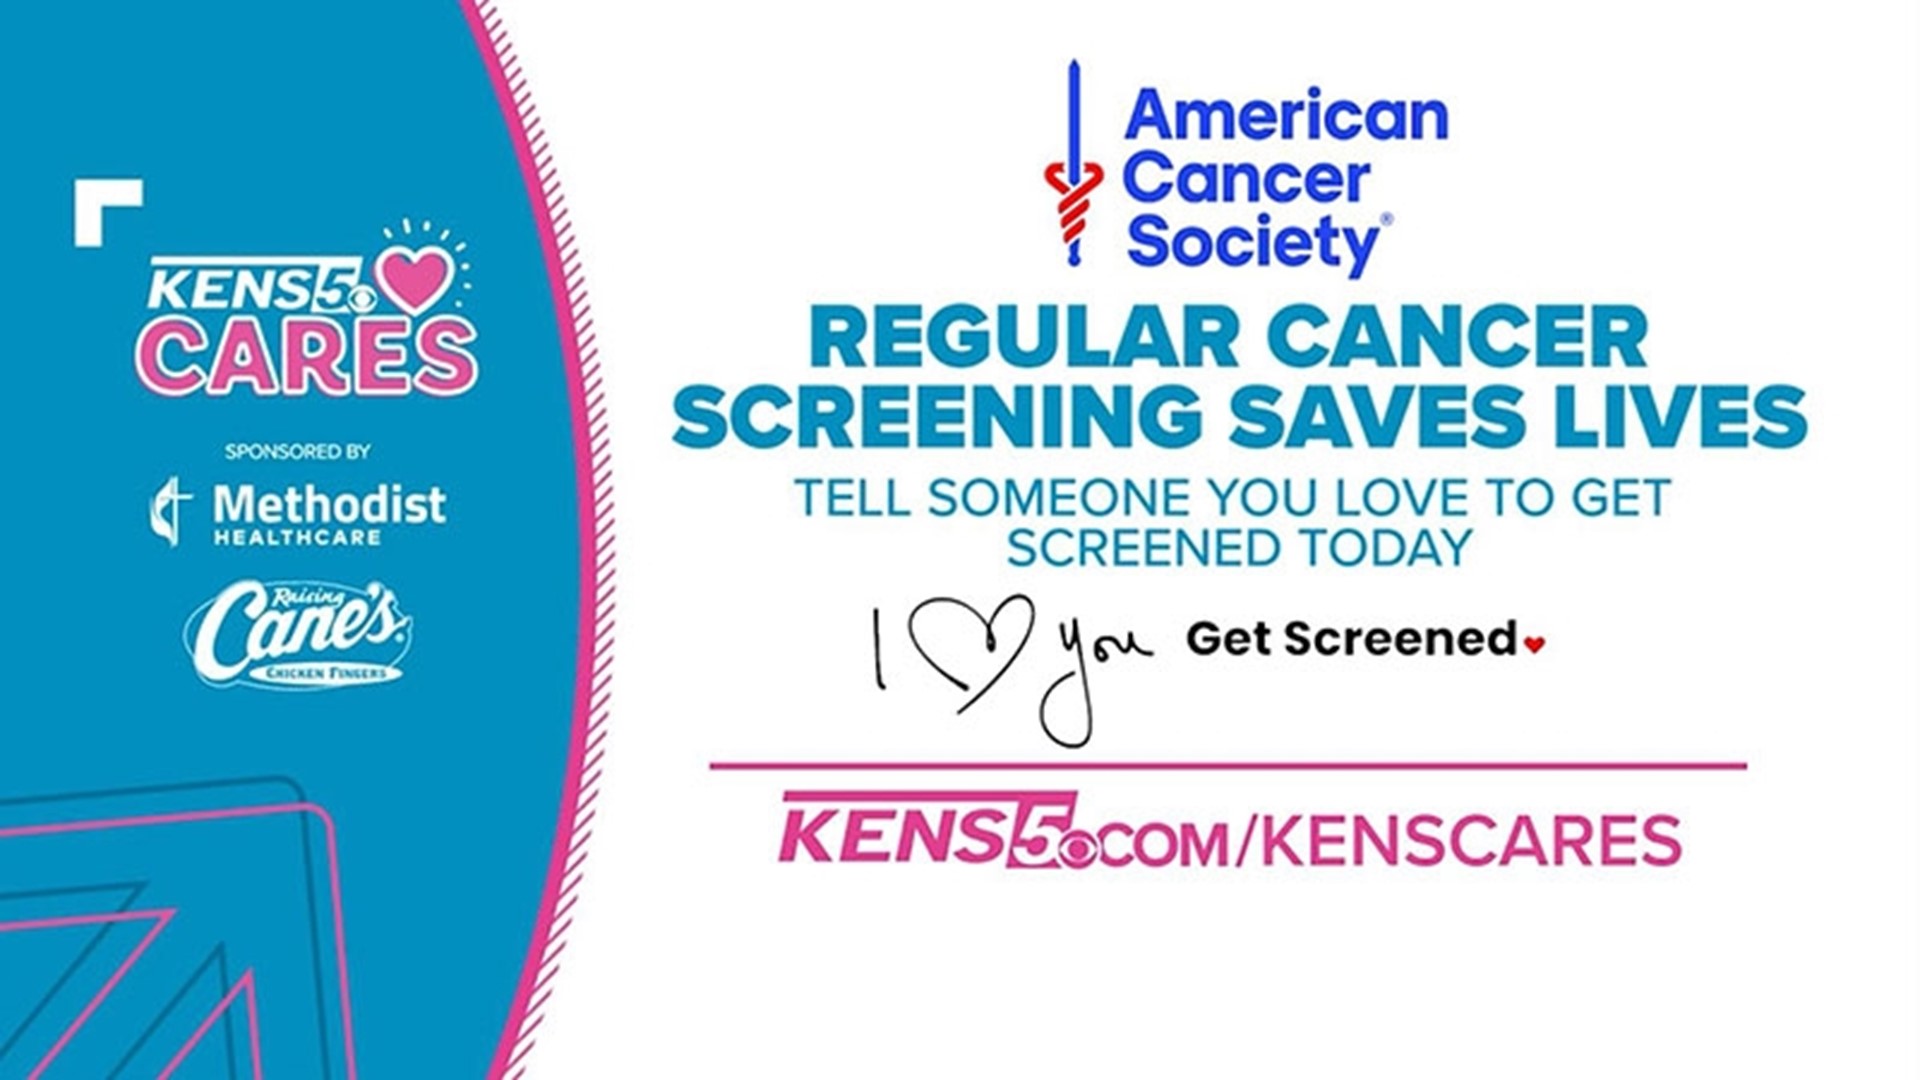 Regular screening increases the chances of detecting certain cancers early, before cancer has a chance to spread. Tell someone you love to get screened today.